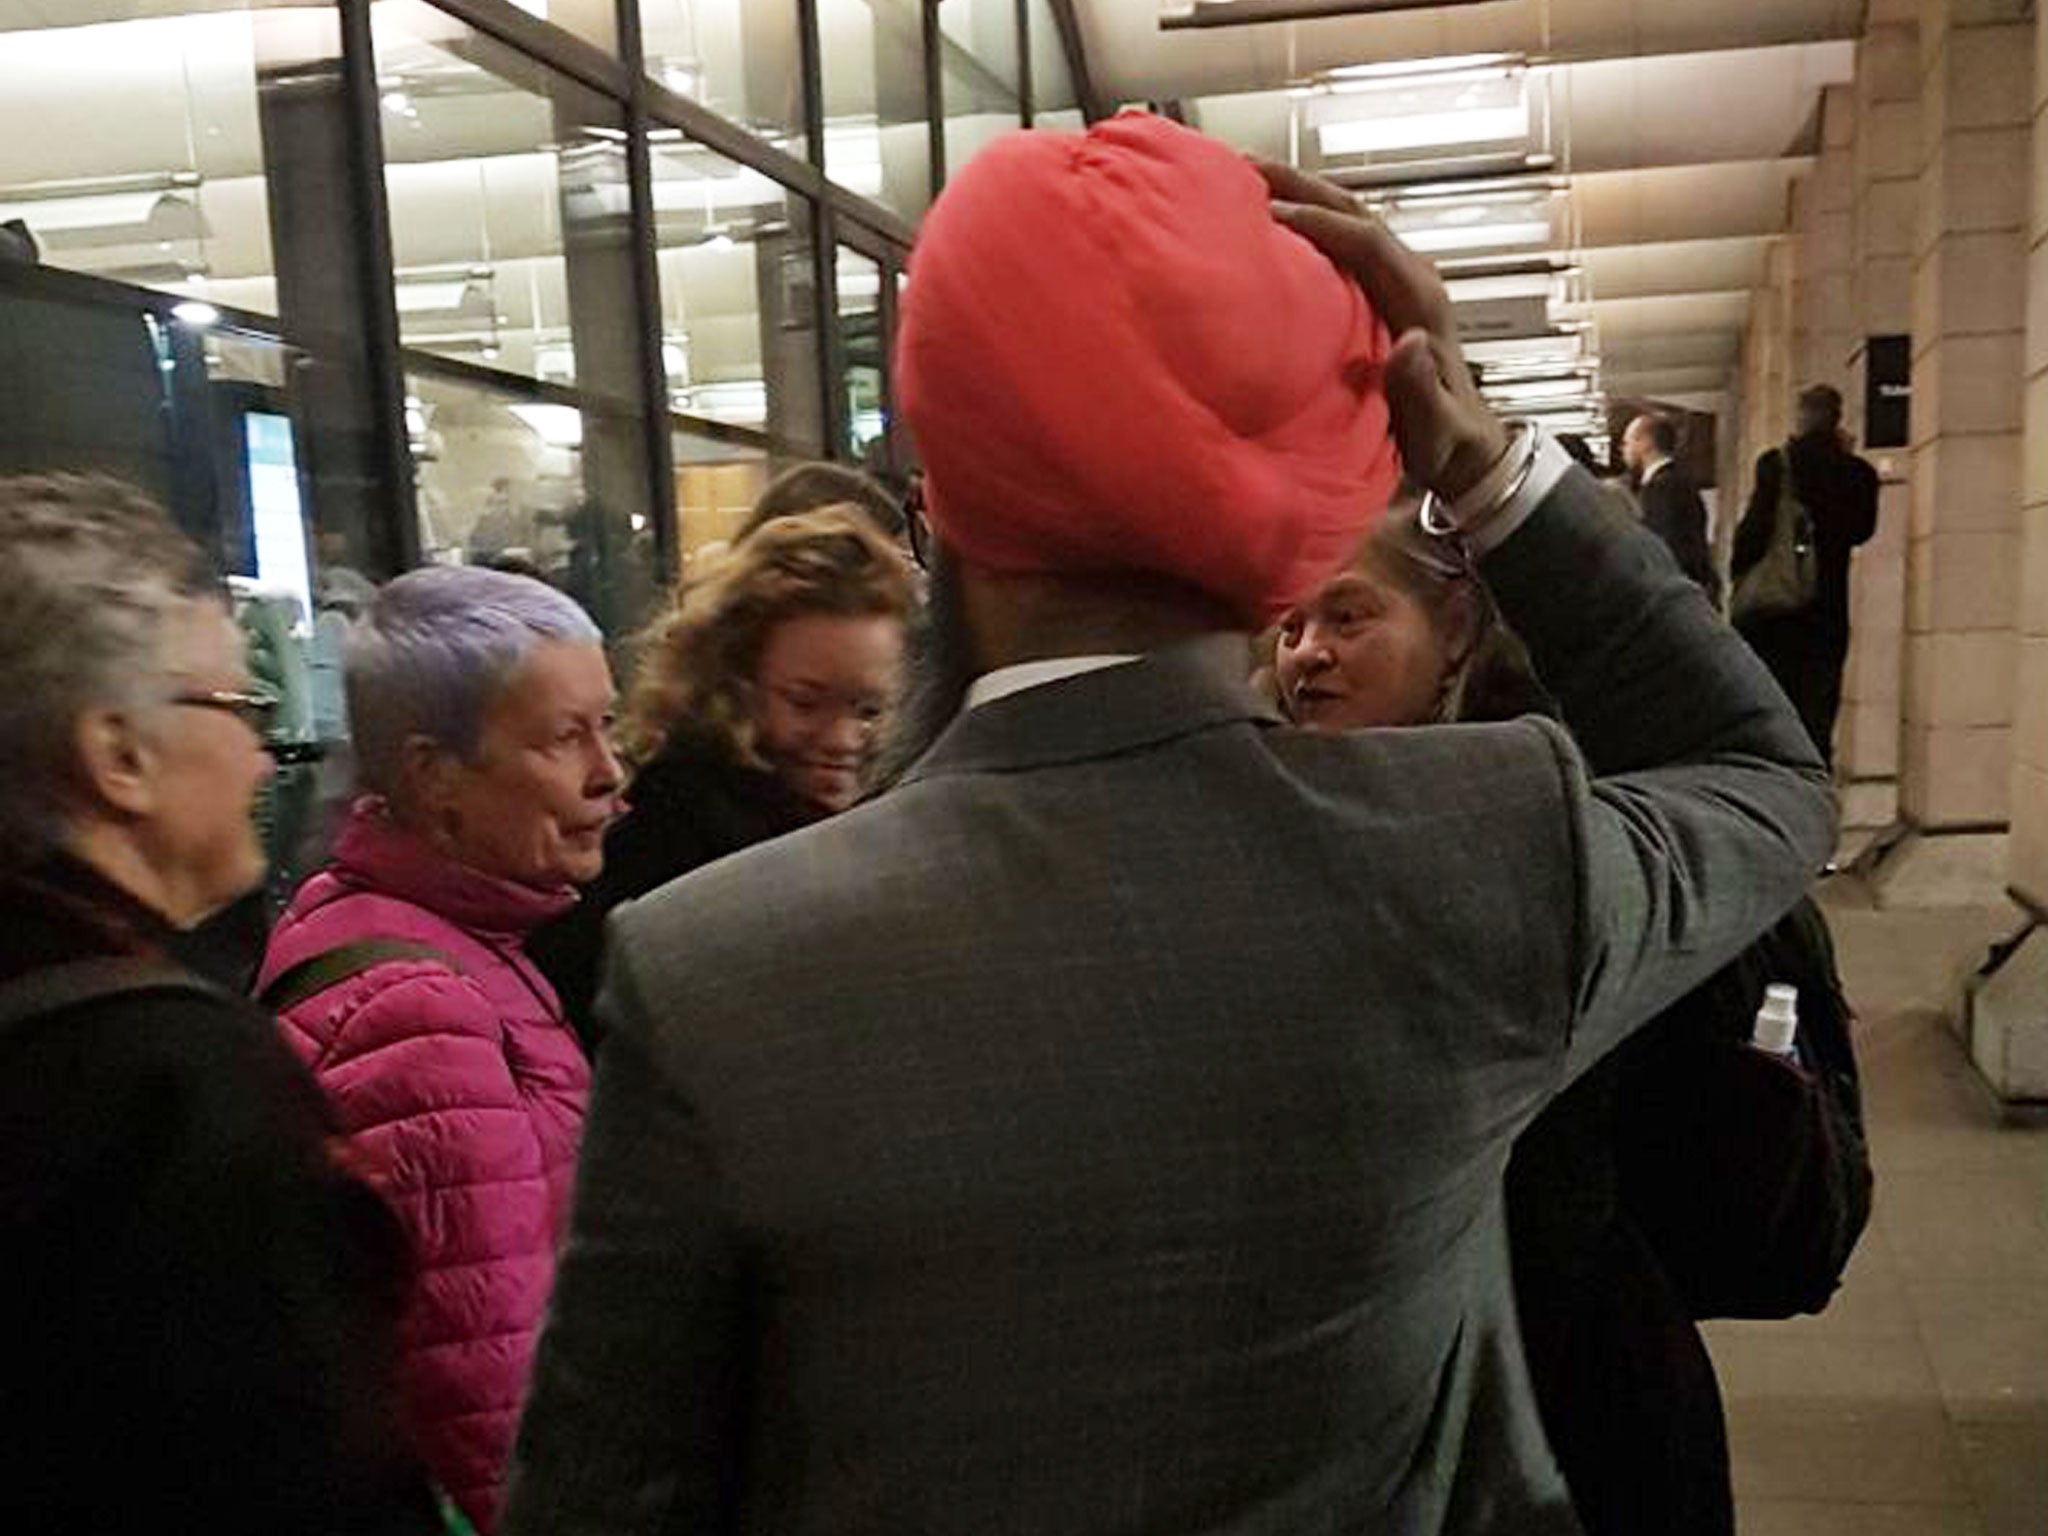 Ravneet Singh's turban was ripped off in an attack outside Portcullis House